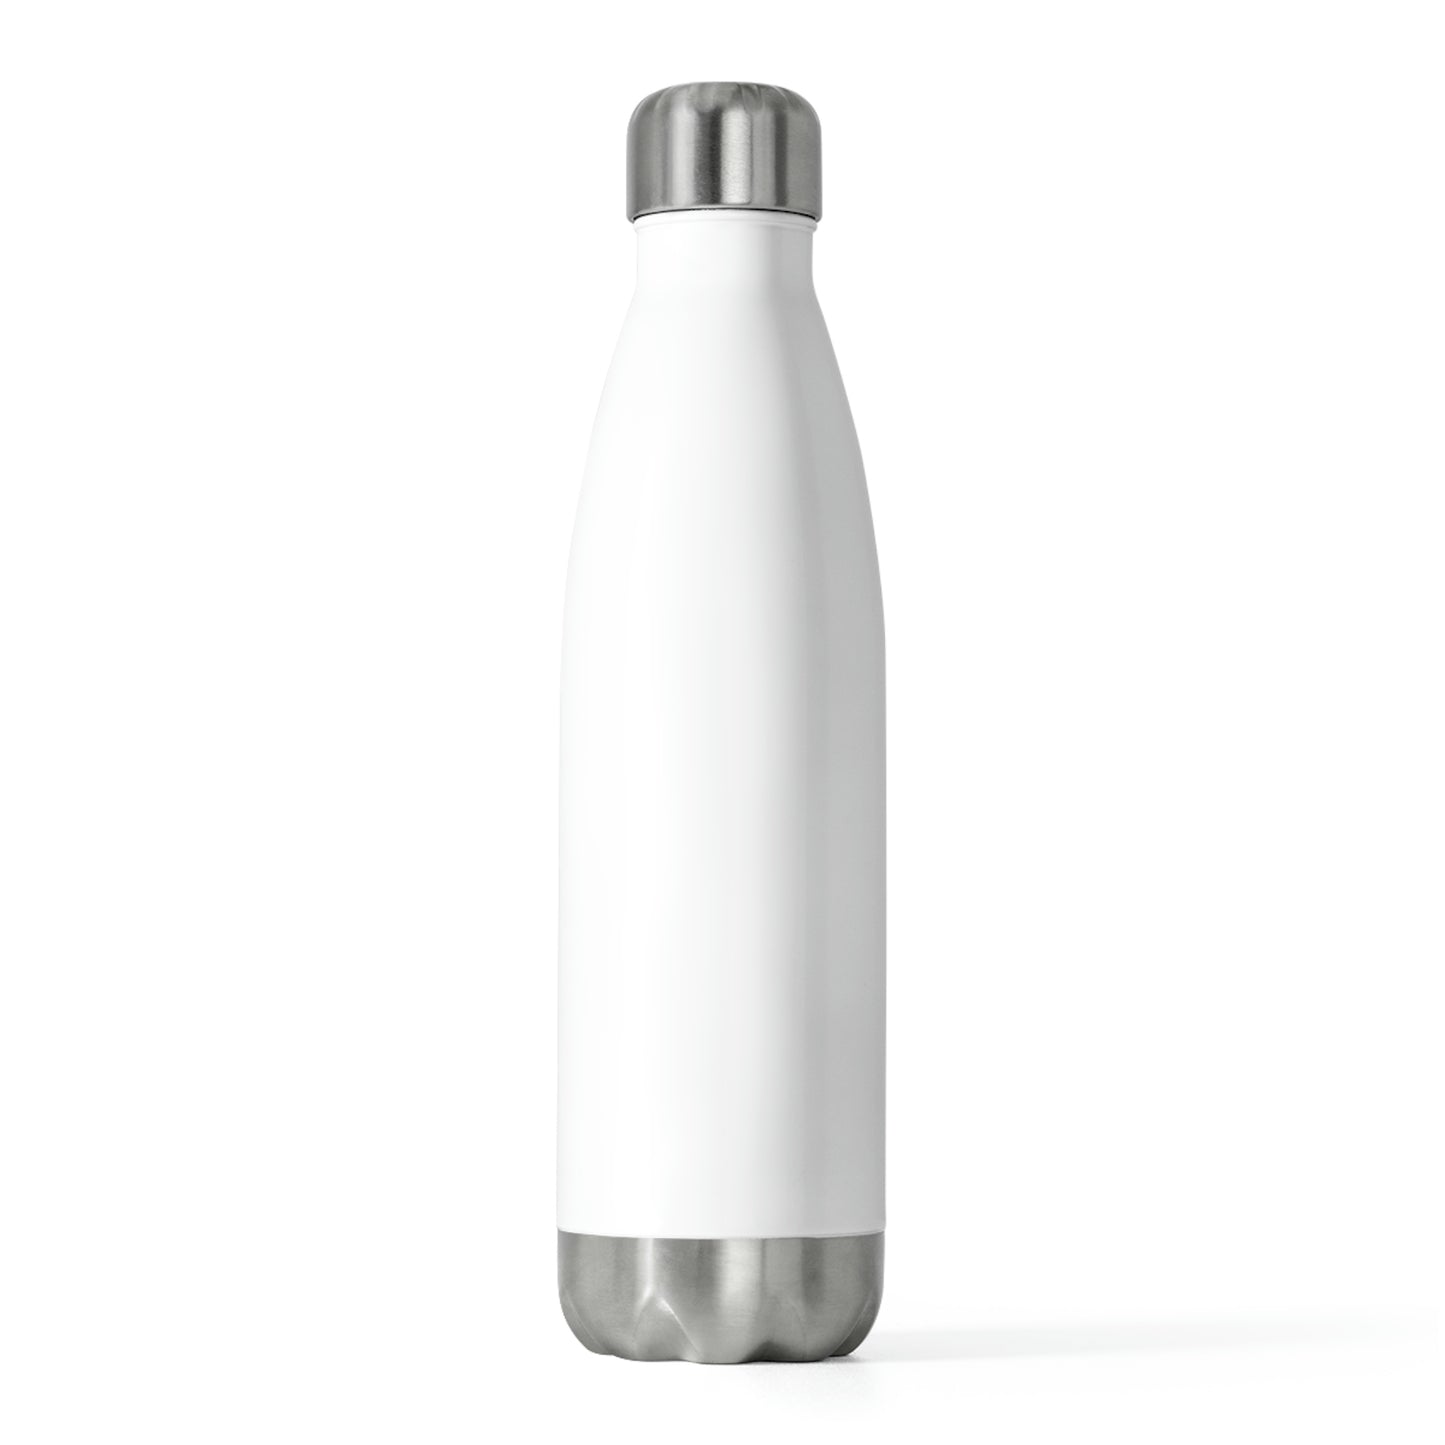 Divinely Inspired Purposefully Created Insulated Bottle